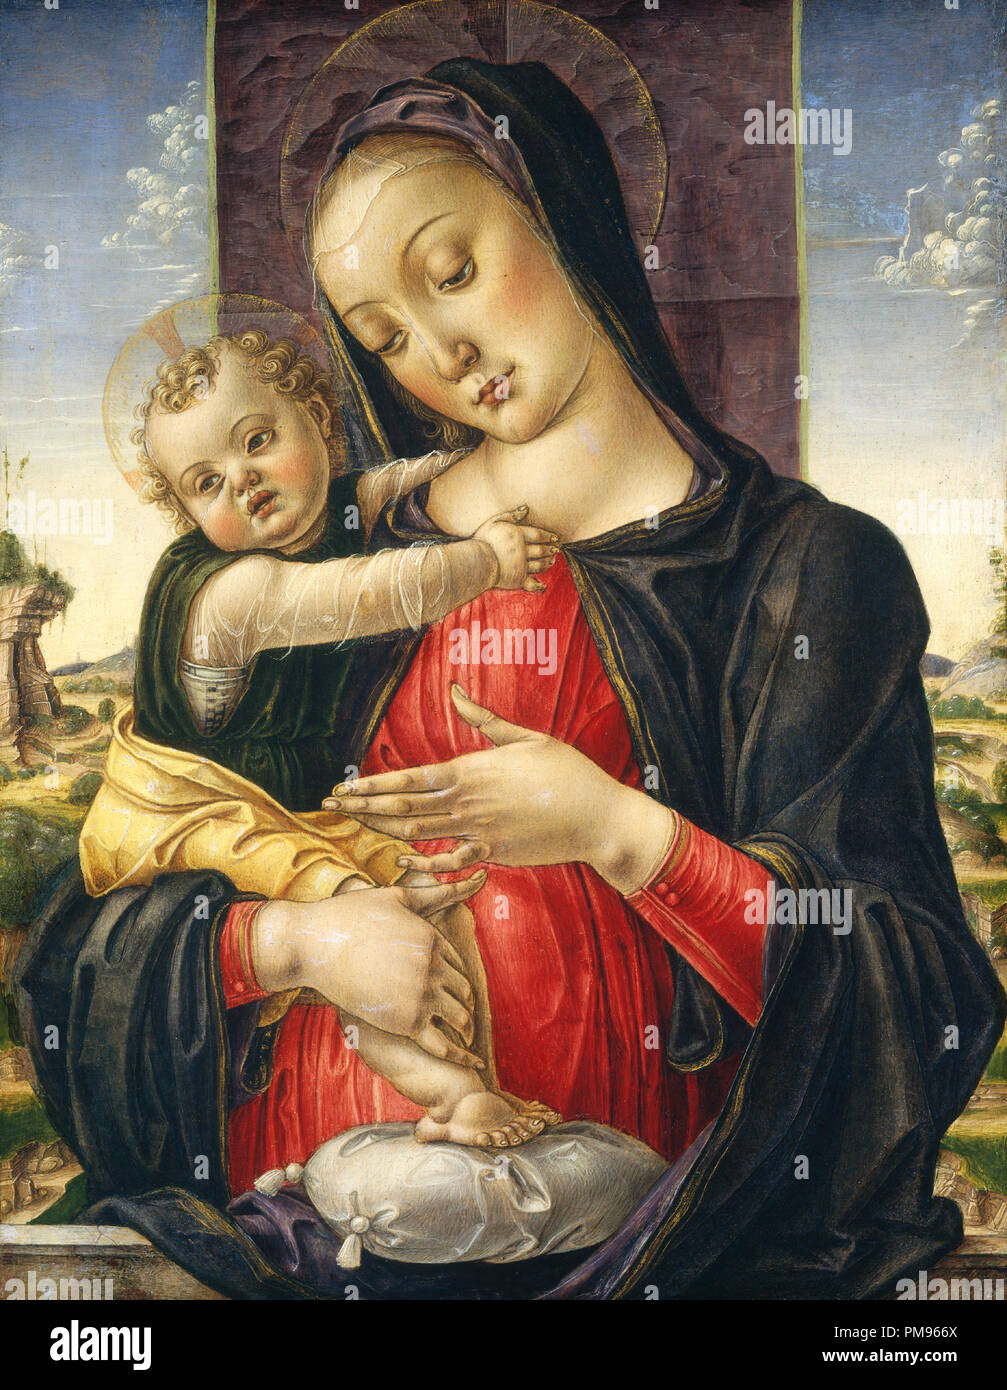 Madonna and Child. Dated: c. 1475. Dimensions: painted surface: 53 x 41.5 cm (20 7/8 x 16 5/16 in.)  overall (area once covered by engaged frame): 54.4 x 42.6 cm (21 7/16 x 16 3/4 in.)  framed: 72.39 x 60.01 x 5.08 cm (28 1/2 x 23 5/8 x 2 in.). Medium: tempera on panel. Museum: National Gallery of Art, Washington DC. Author: BARTOLOMEO VIVARINI. VIVARINI, BARTOLOMEO. Stock Photo